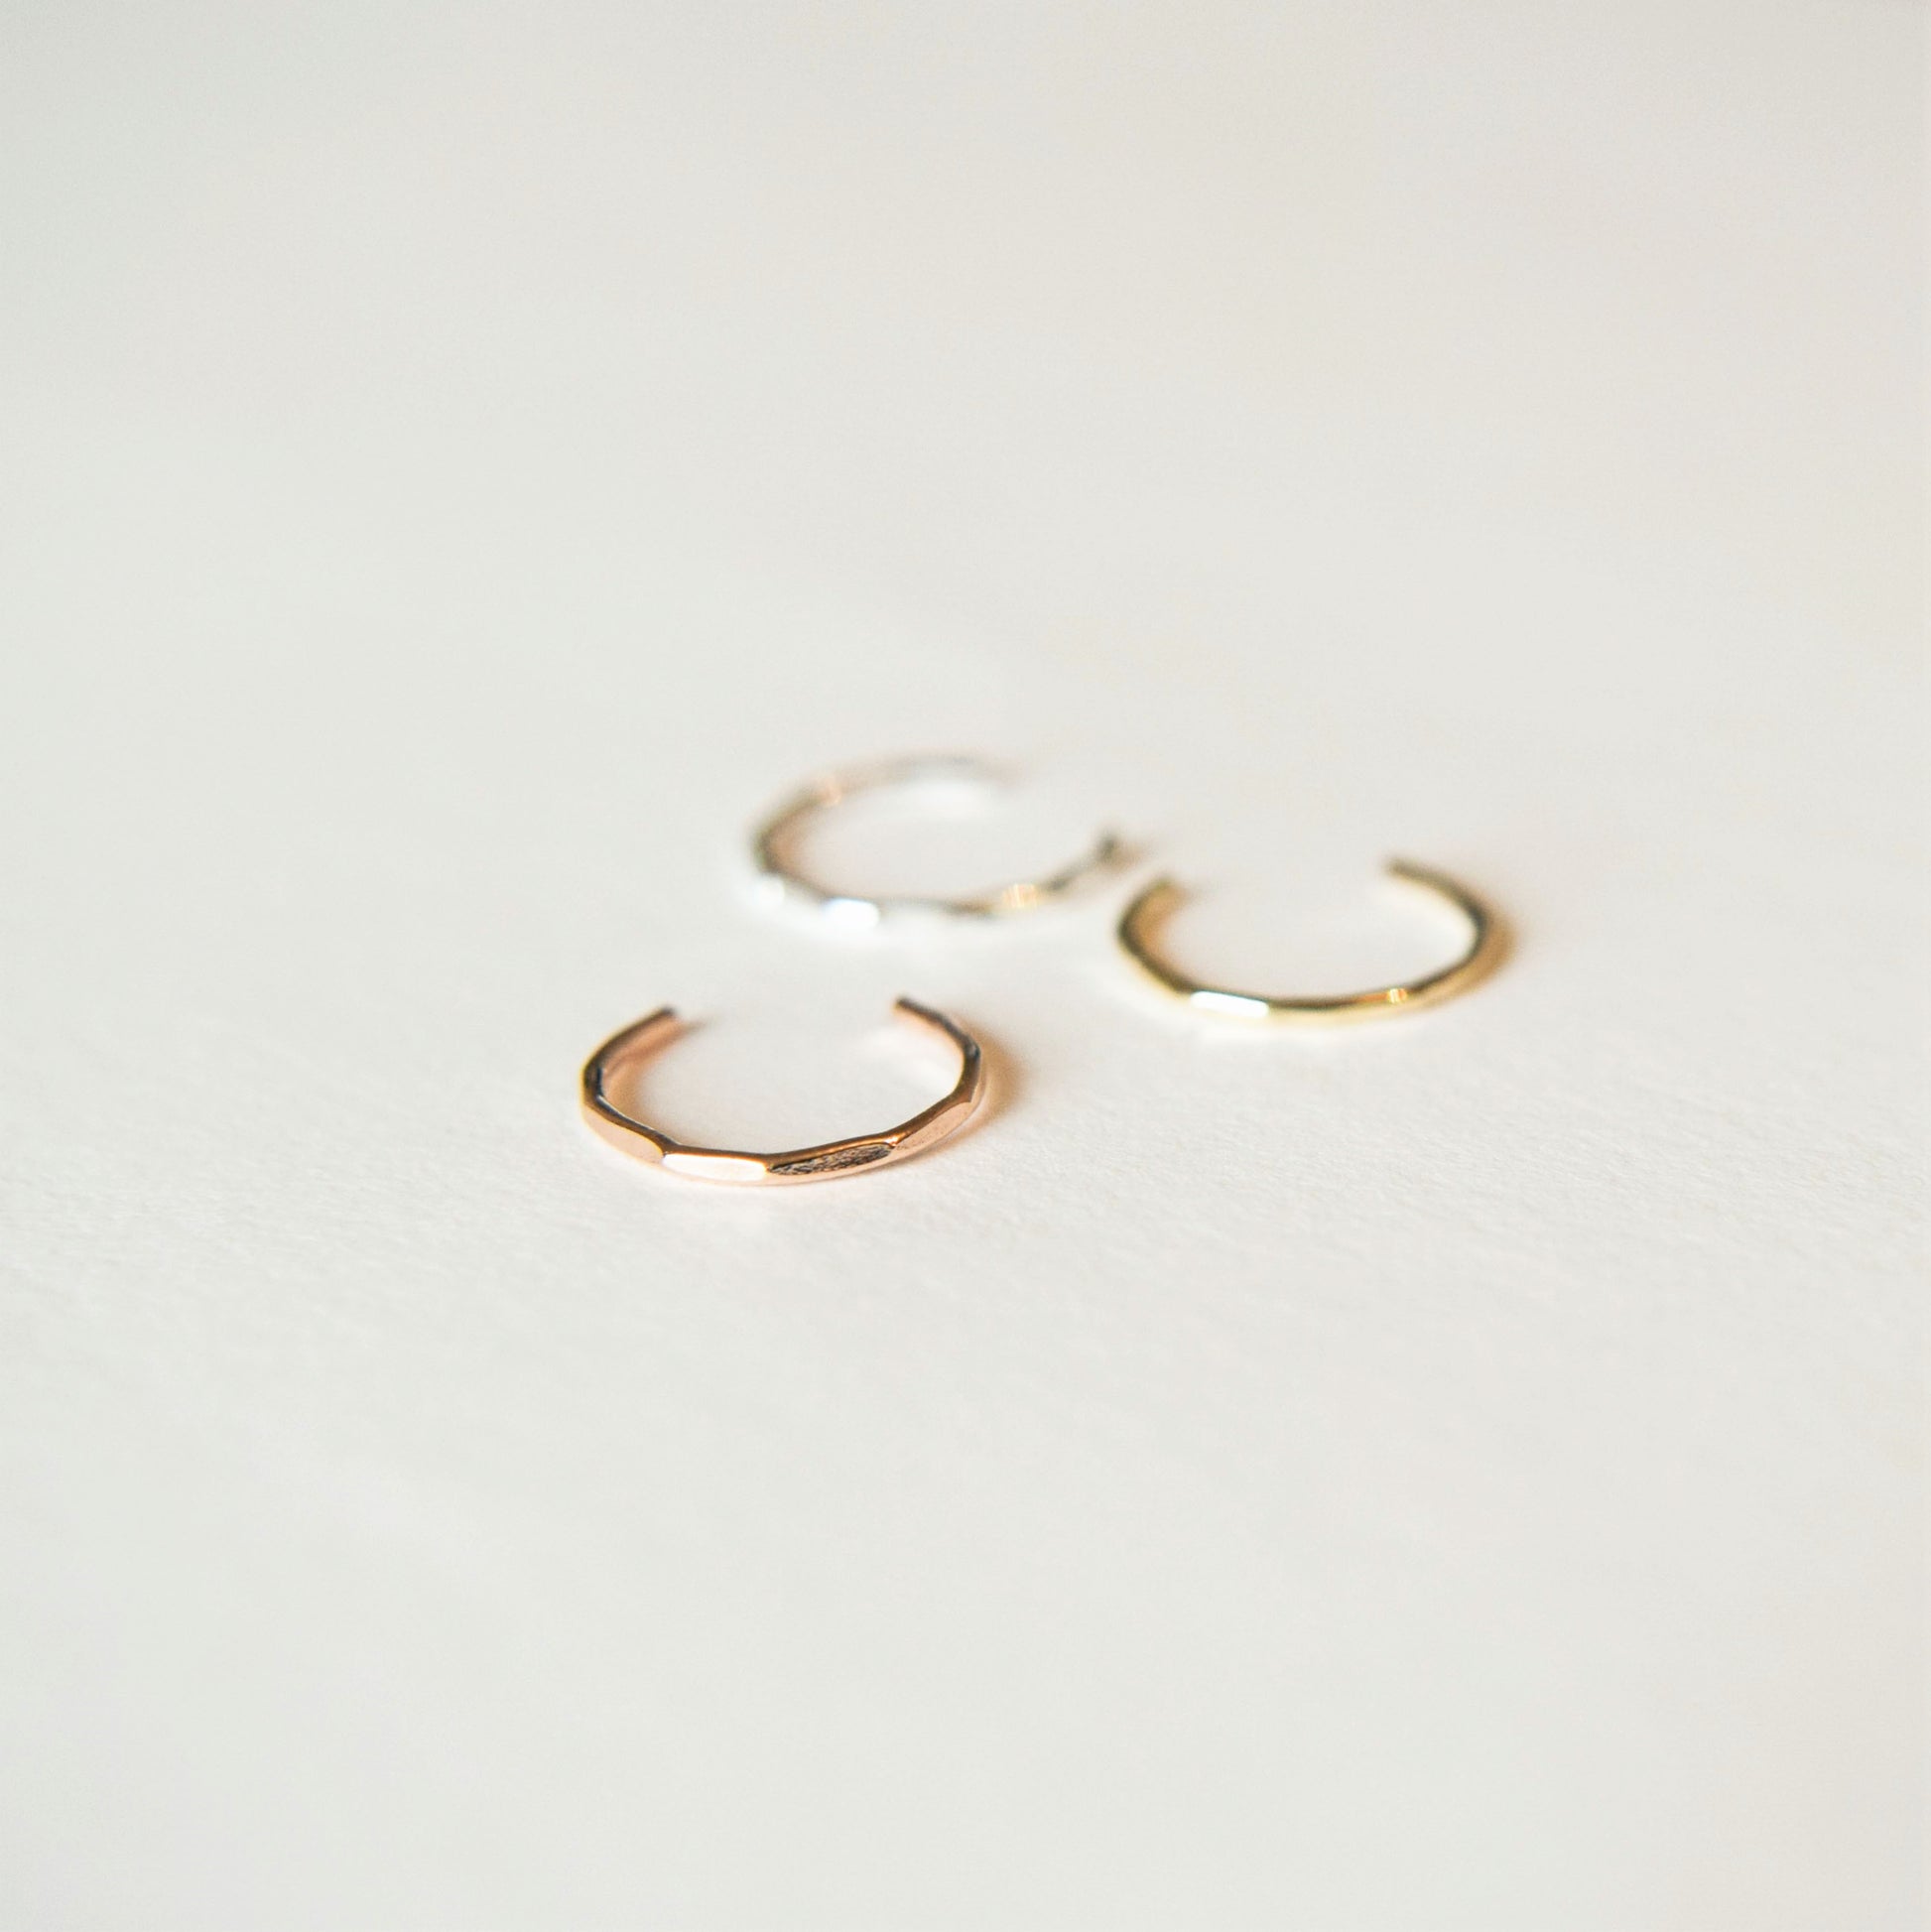 product image showing three ear cuffs on a white background